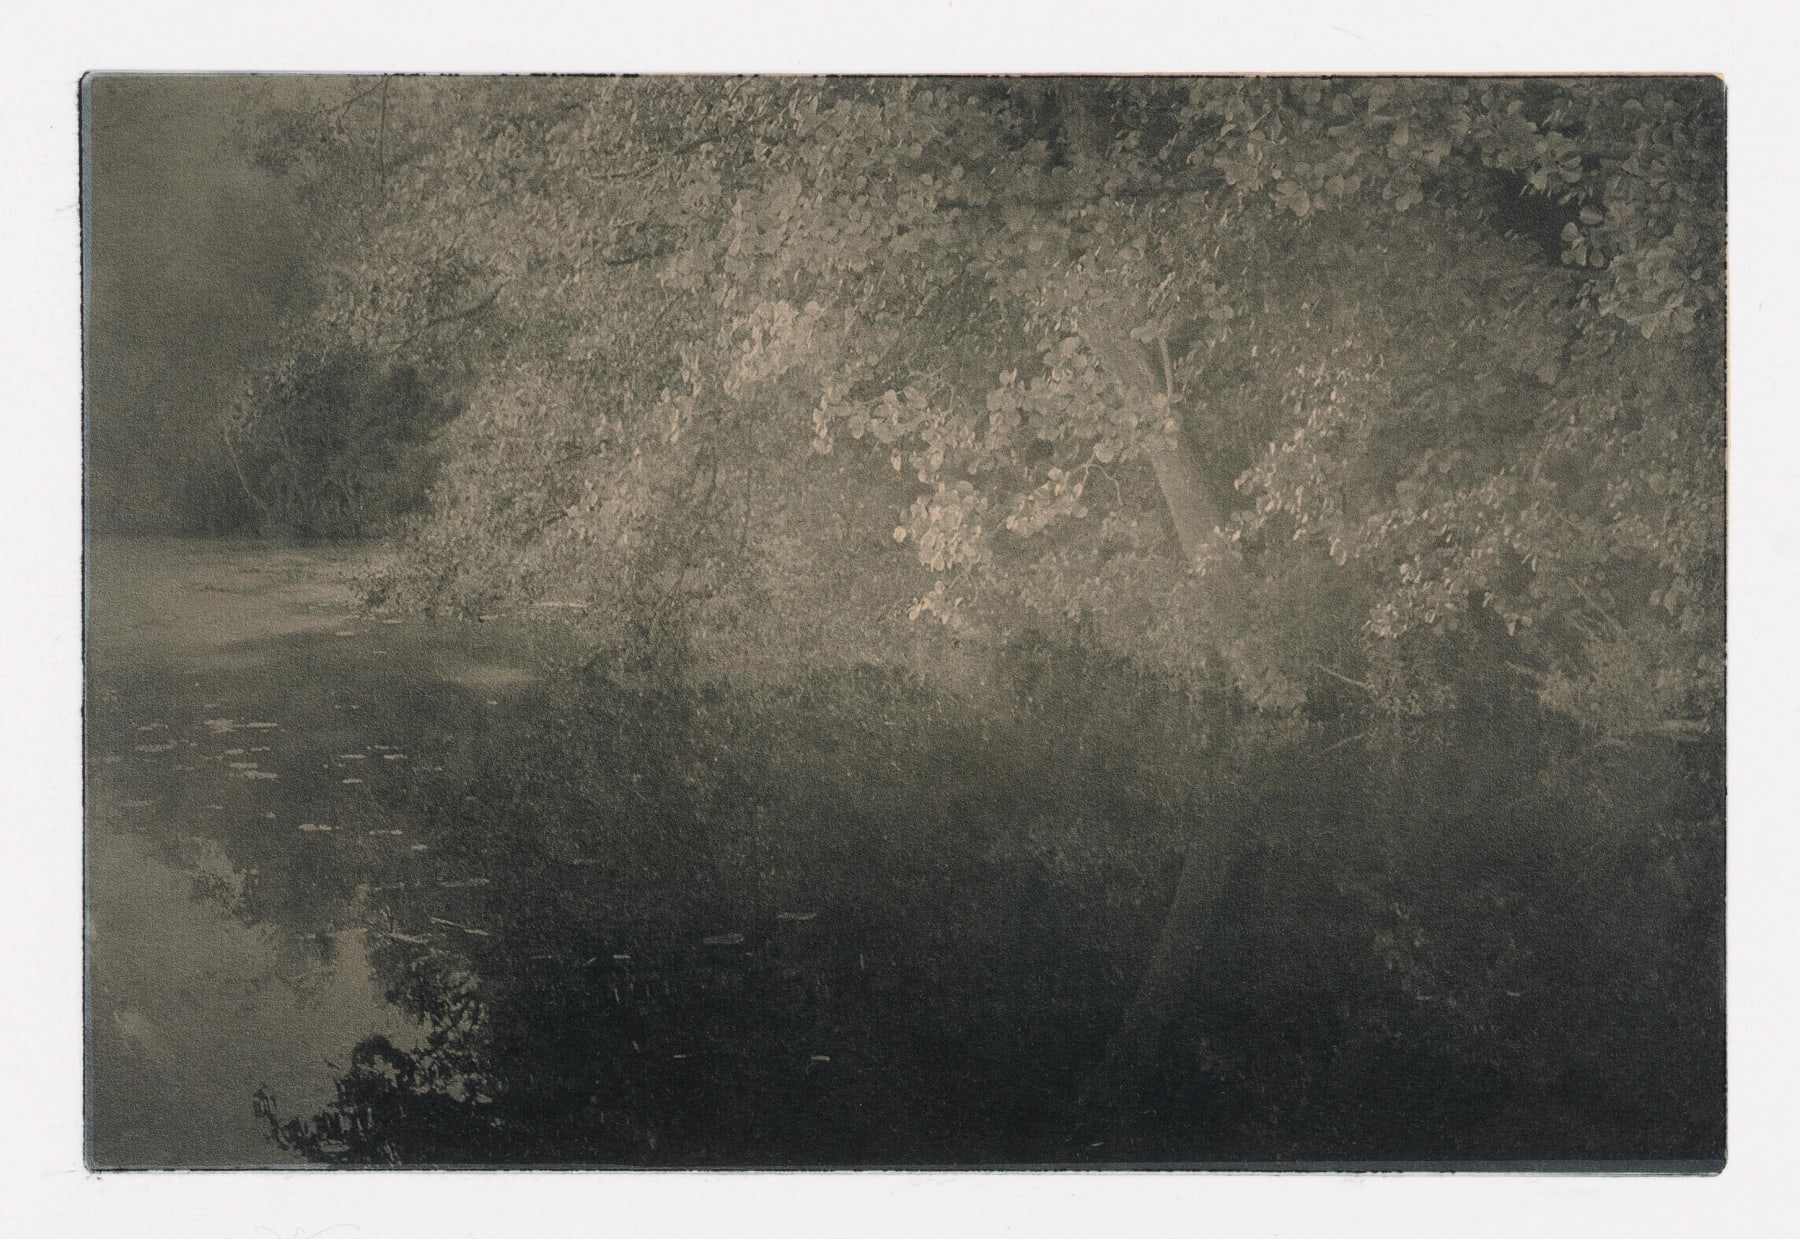 Delicate Reflection II Photogravure Etching and Chin Collé 36.5 x 28.5cm Edition of 4 plus 1 artist's proof $ 700.00